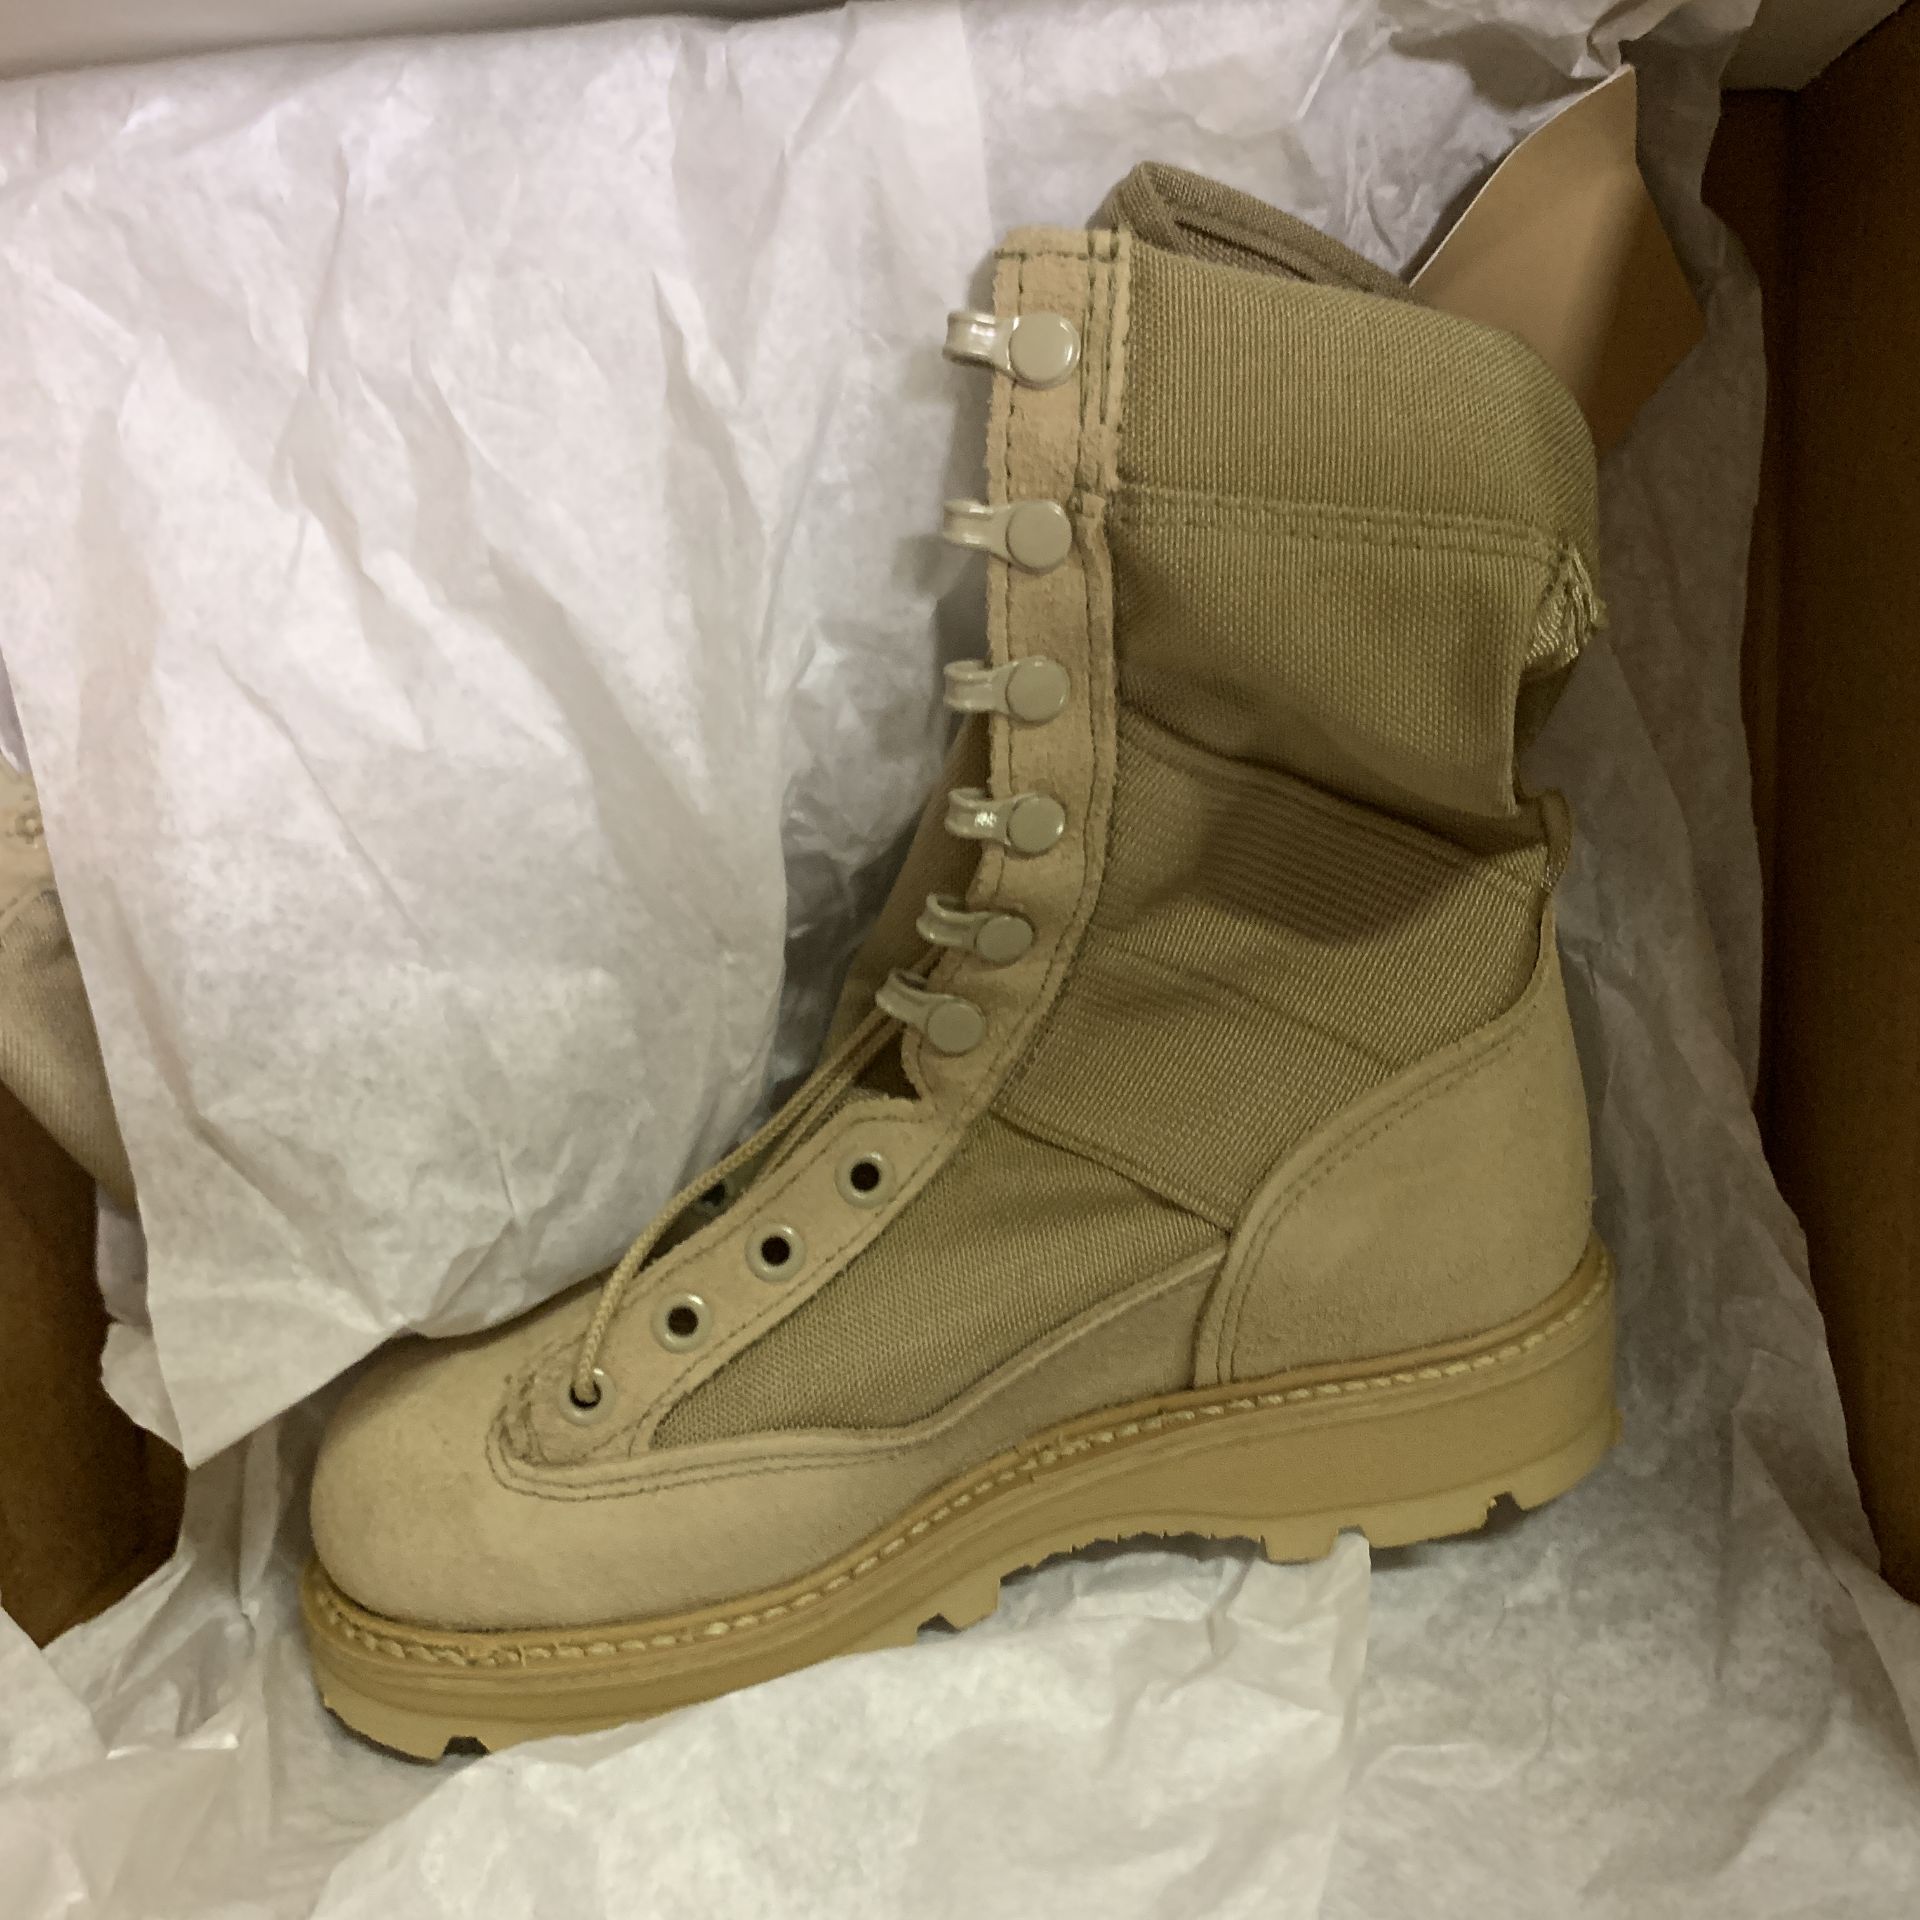 8 Pairs of Corcoran Desert Combat Boots, Tan 4380, Various Sizes, New in Box, Retail $400++ - Image 3 of 3